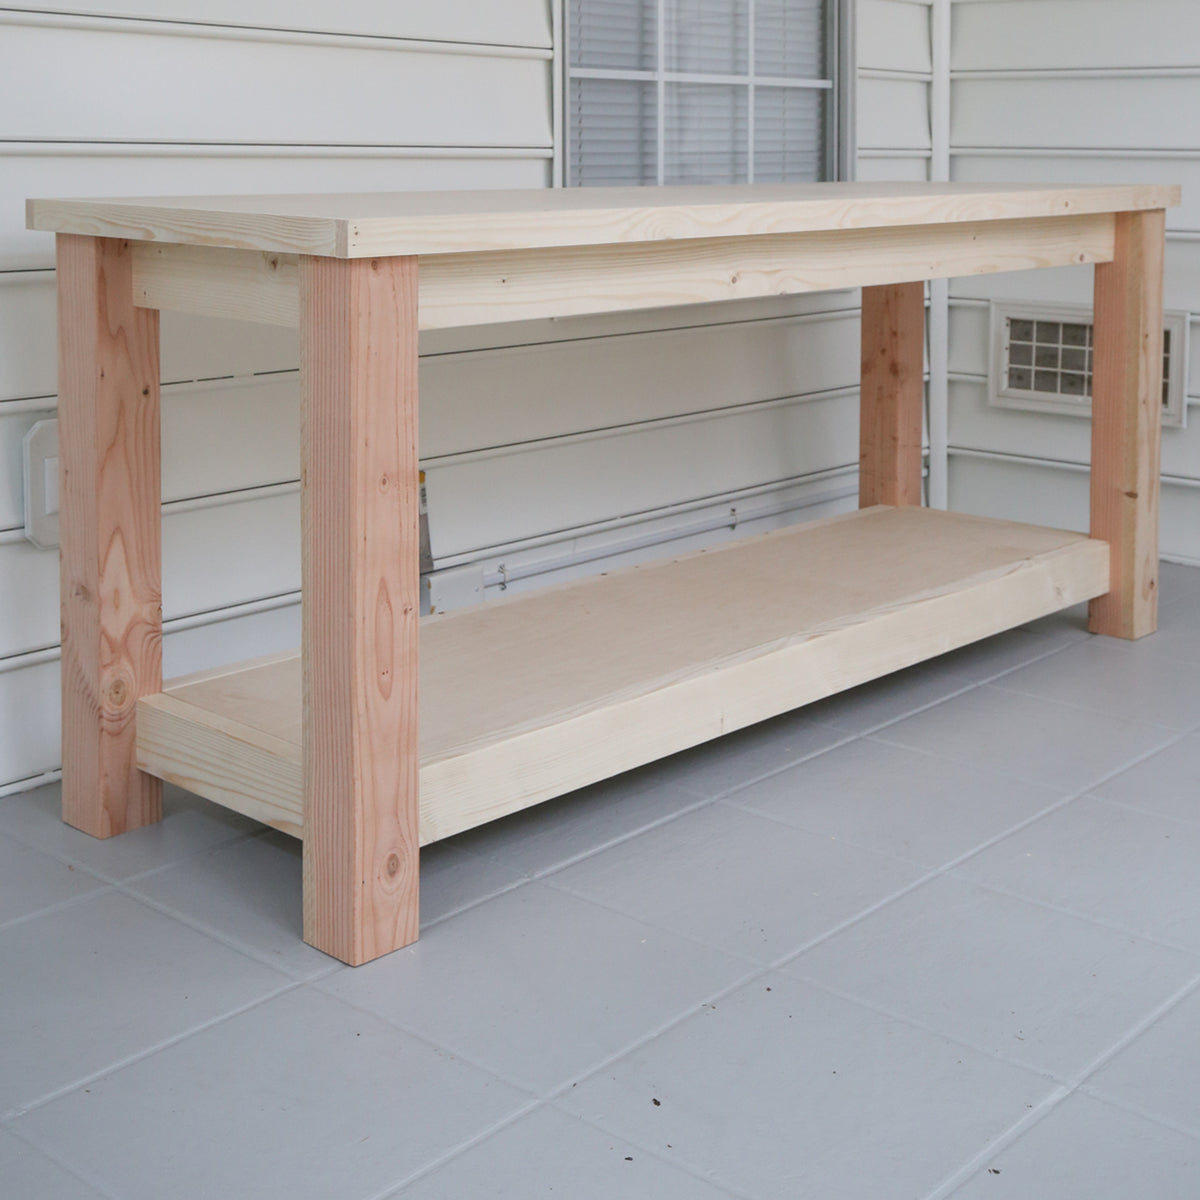 Work Bench  Woodworking bench plans, Woodworking bench, Woodworking plans